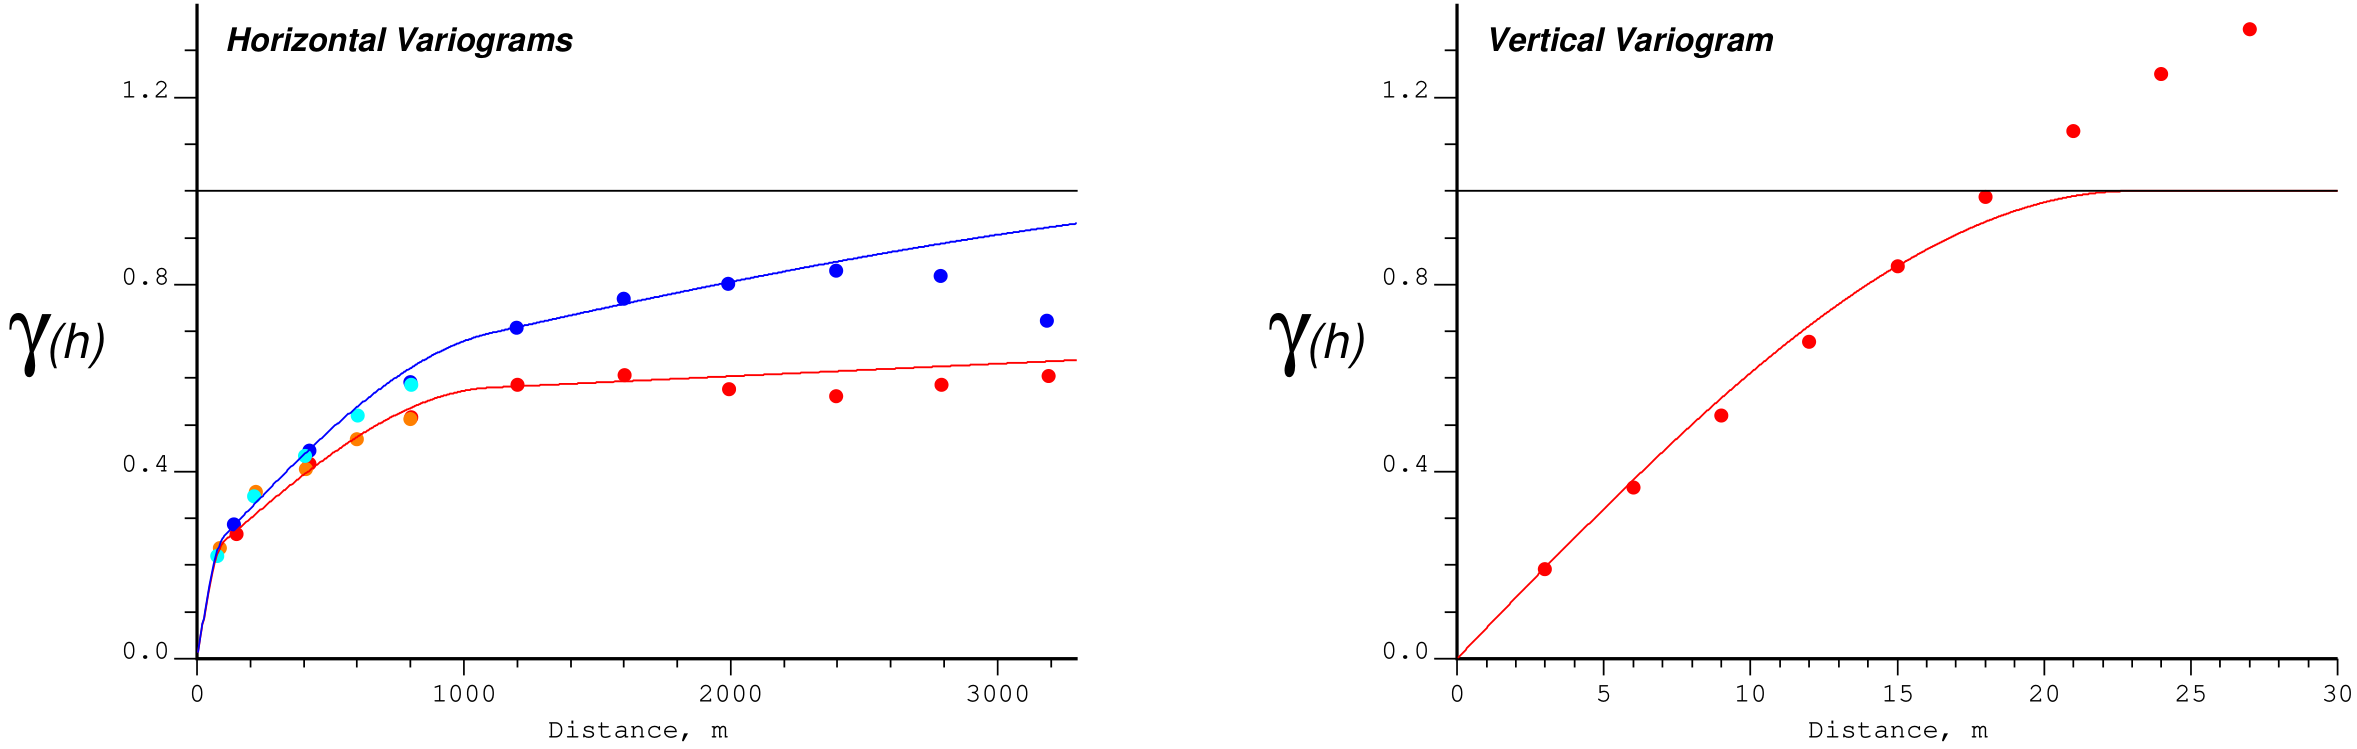 Example of directional variograms from an oil sands data set commonly used in the Citation program - the variogram values have been standardized by the variance.